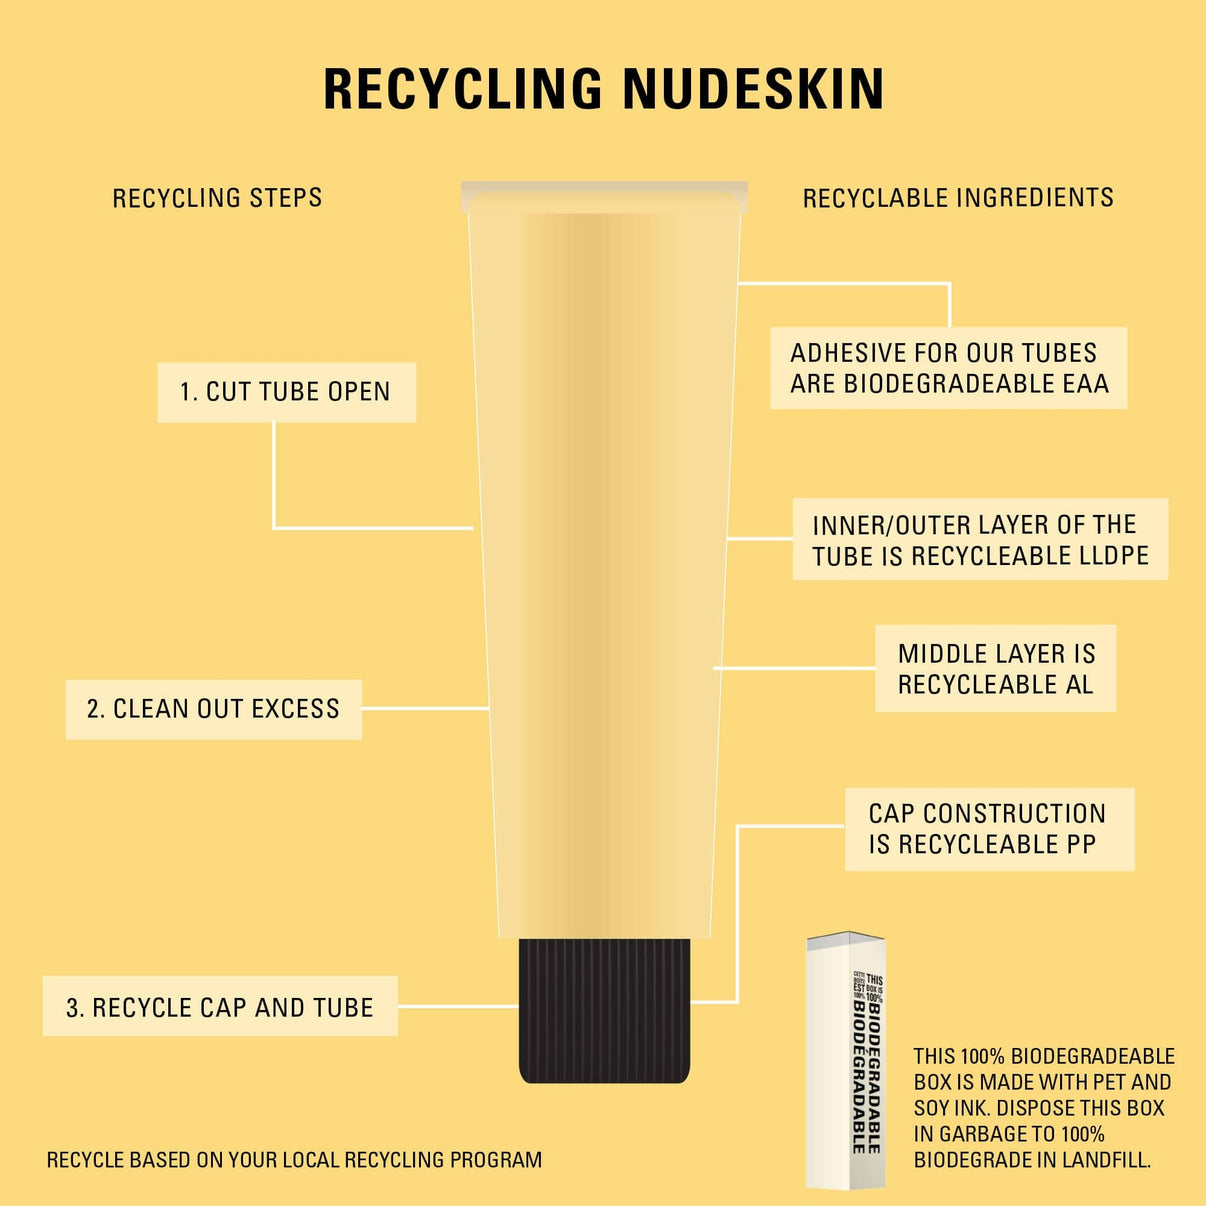 Recycling nudeskin steps and ingredients for Citrus-C Mask & Daily Moisturizer